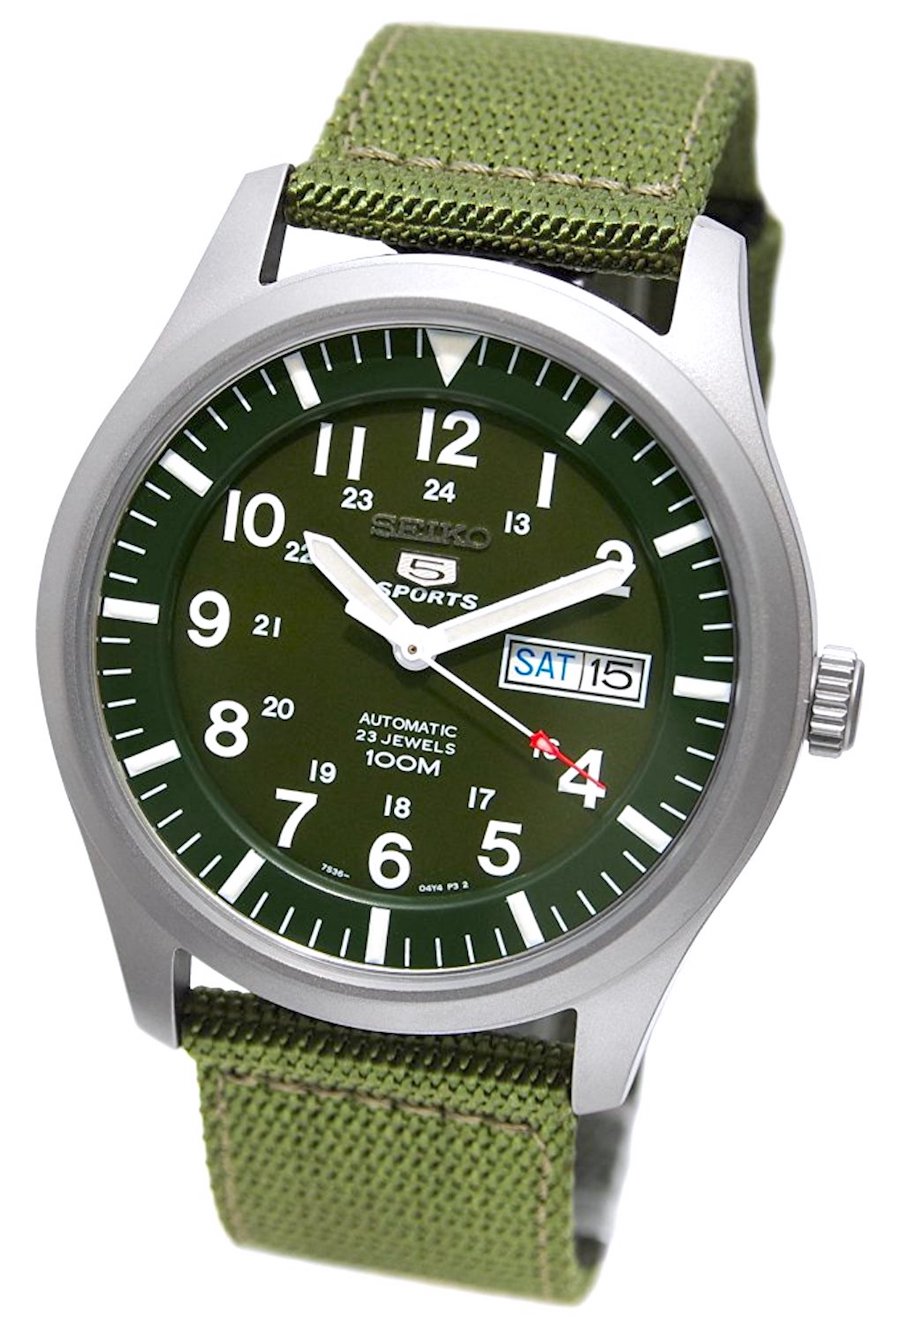 Seven Awesome Field Watches For Every Budget | aBlogtoWatch